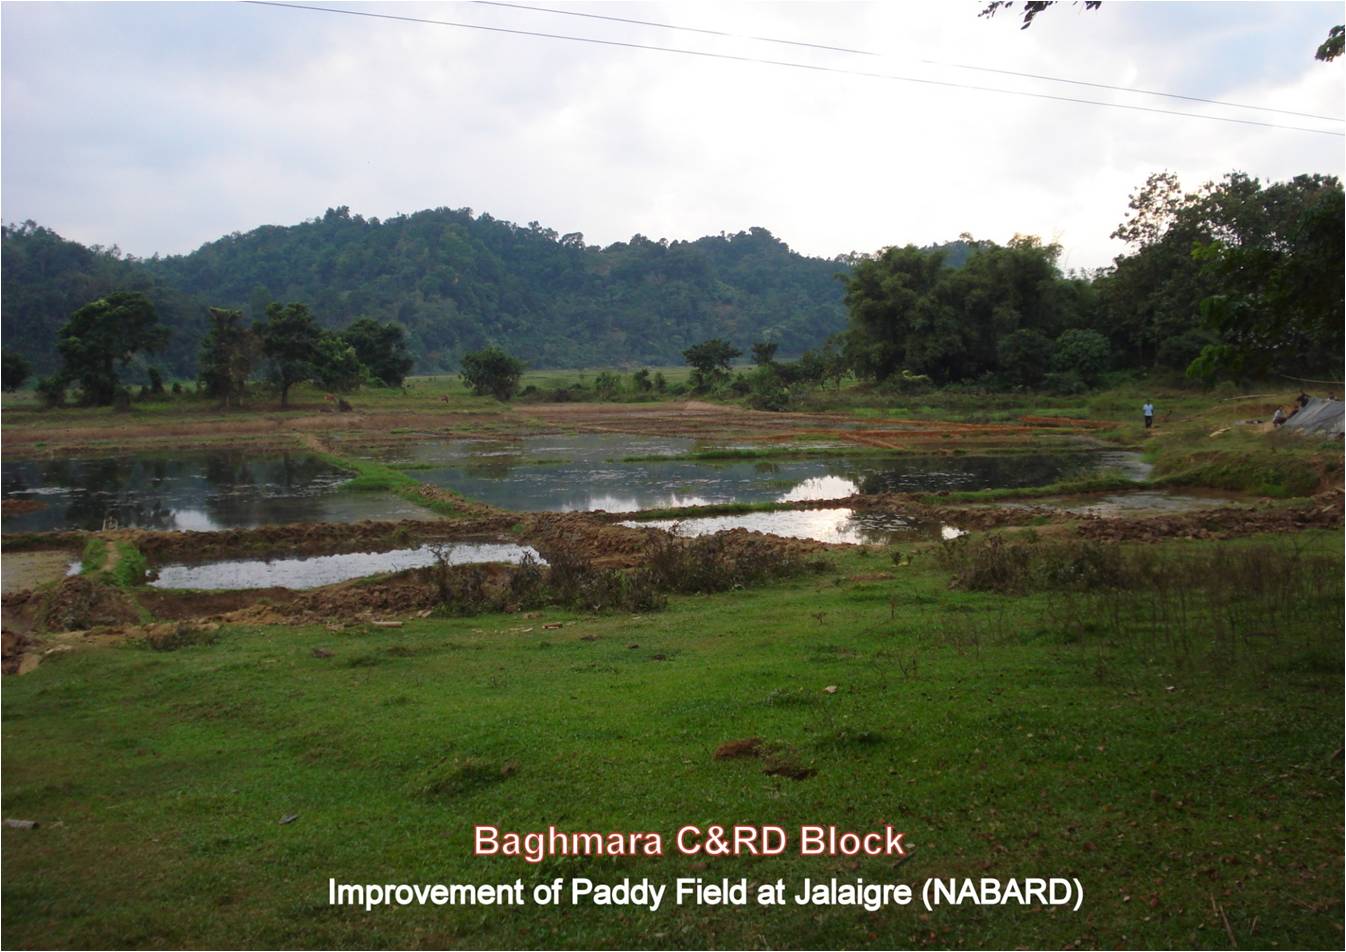 Improvement of Paddy Field at Jaliagre